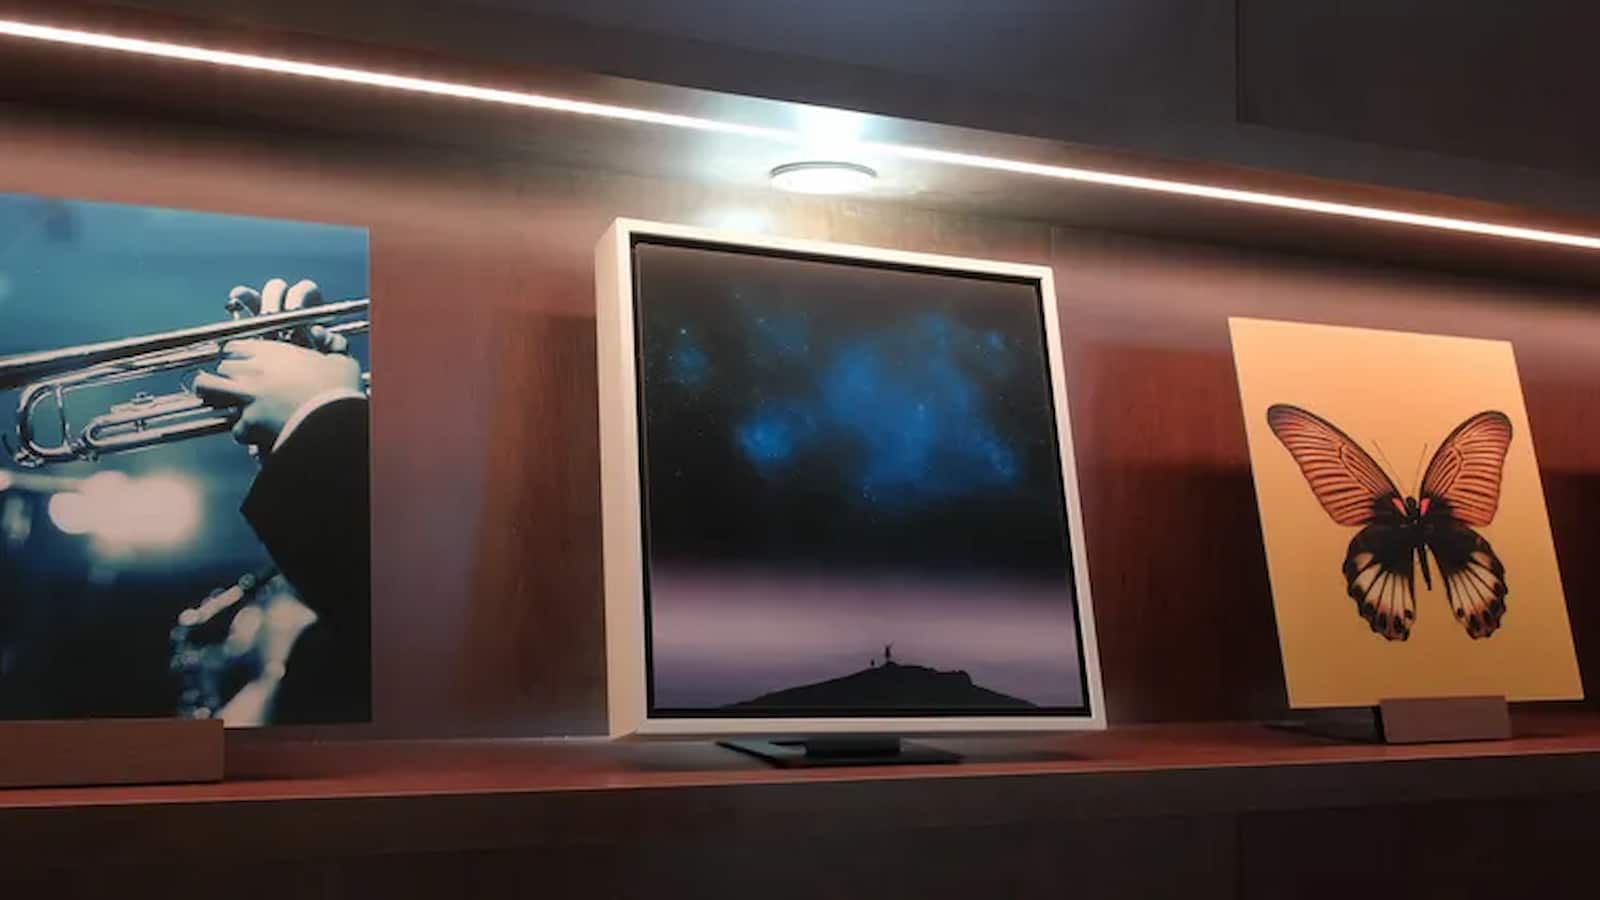 Samsung introduces The Music Frame, a speaker version of its popular The Frame TV